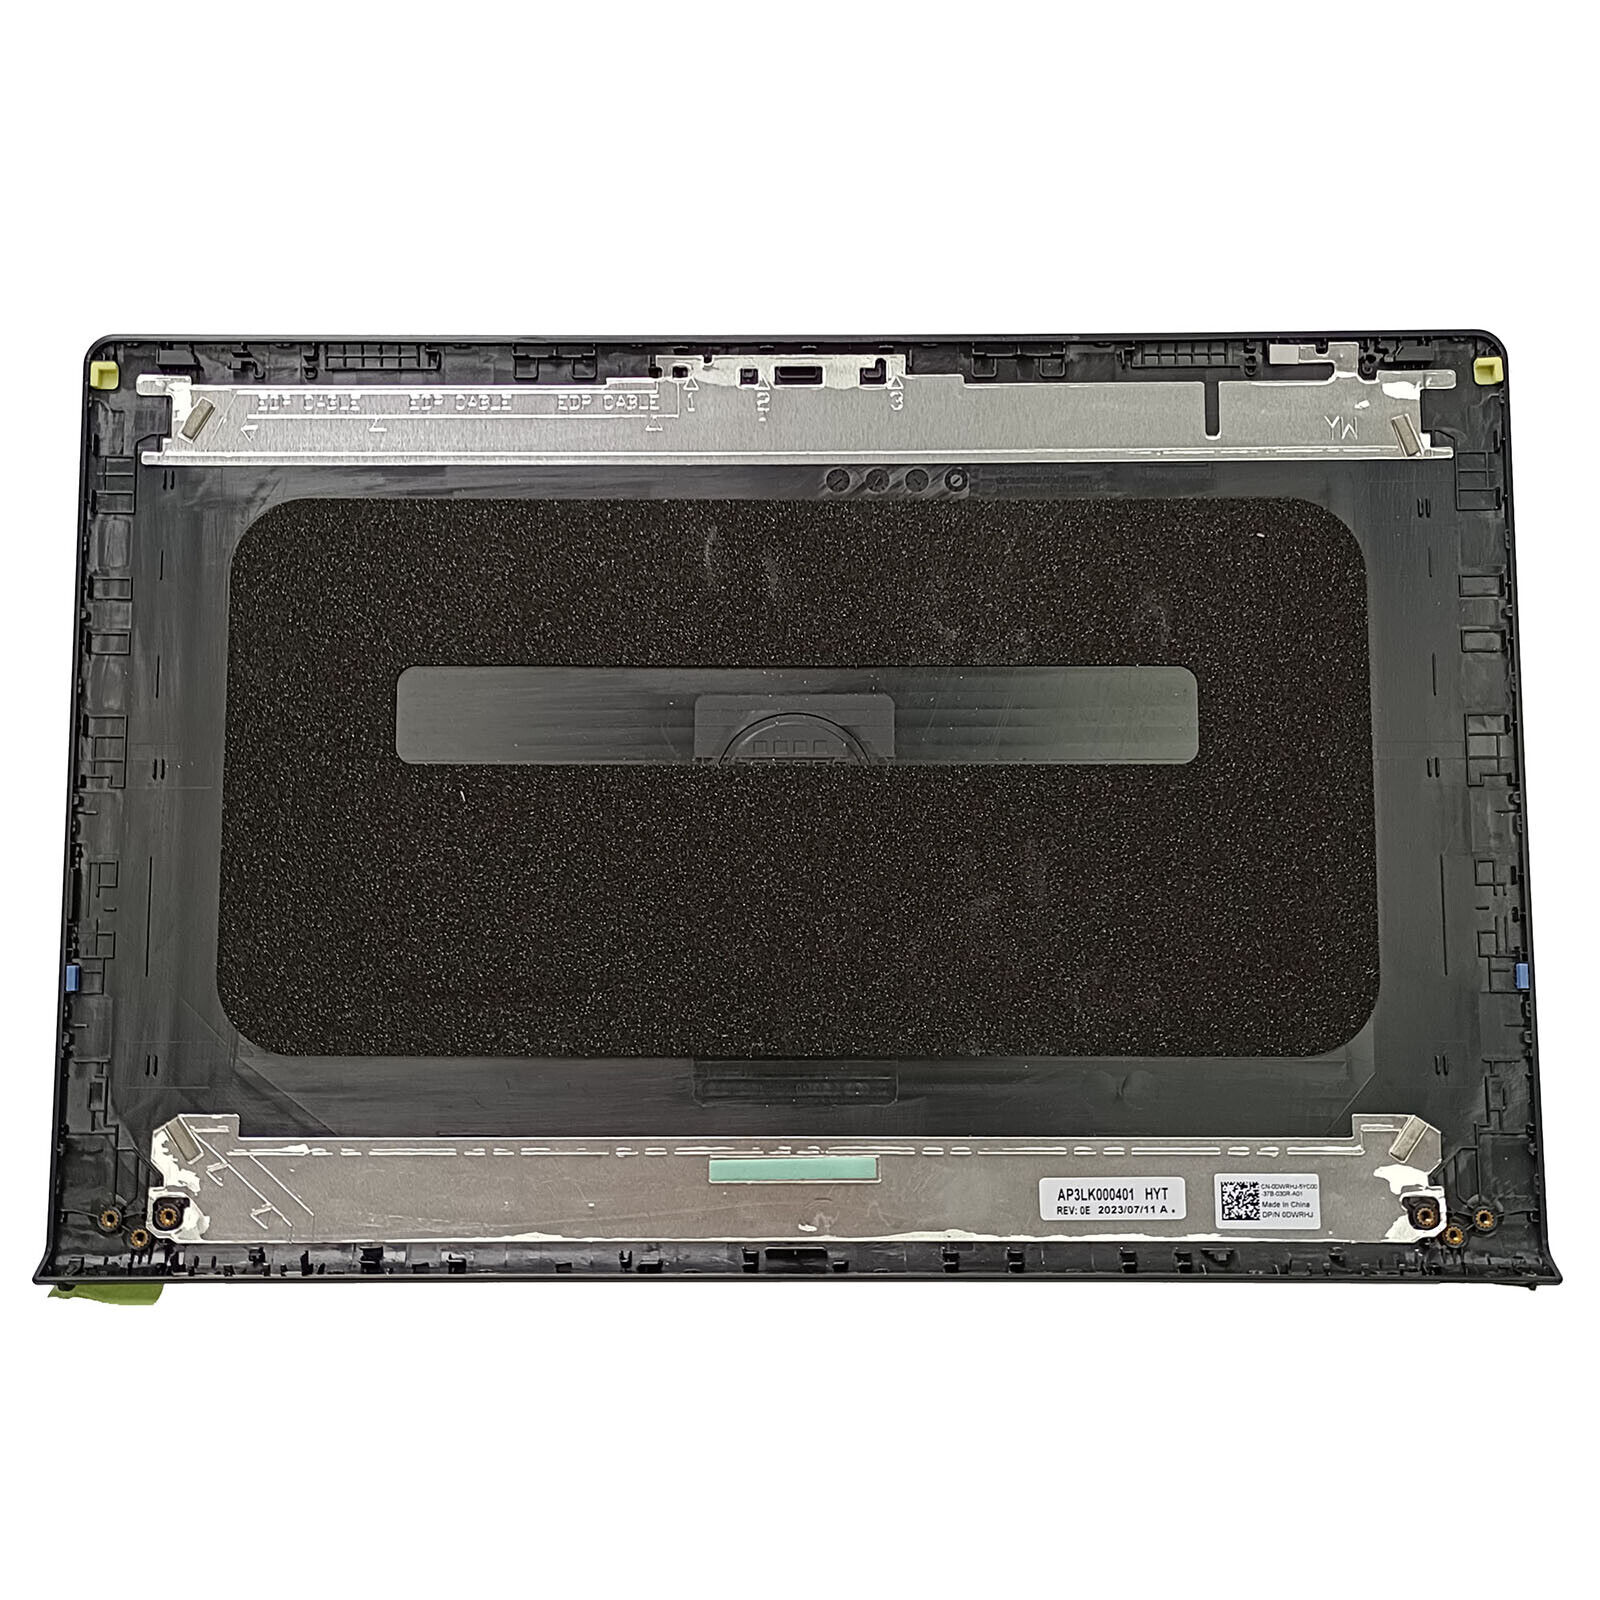 Black Lcd Back Cover Lid For Dell Vostro 15 3510 3520 3525 DWRHJ AP3LK000401 New